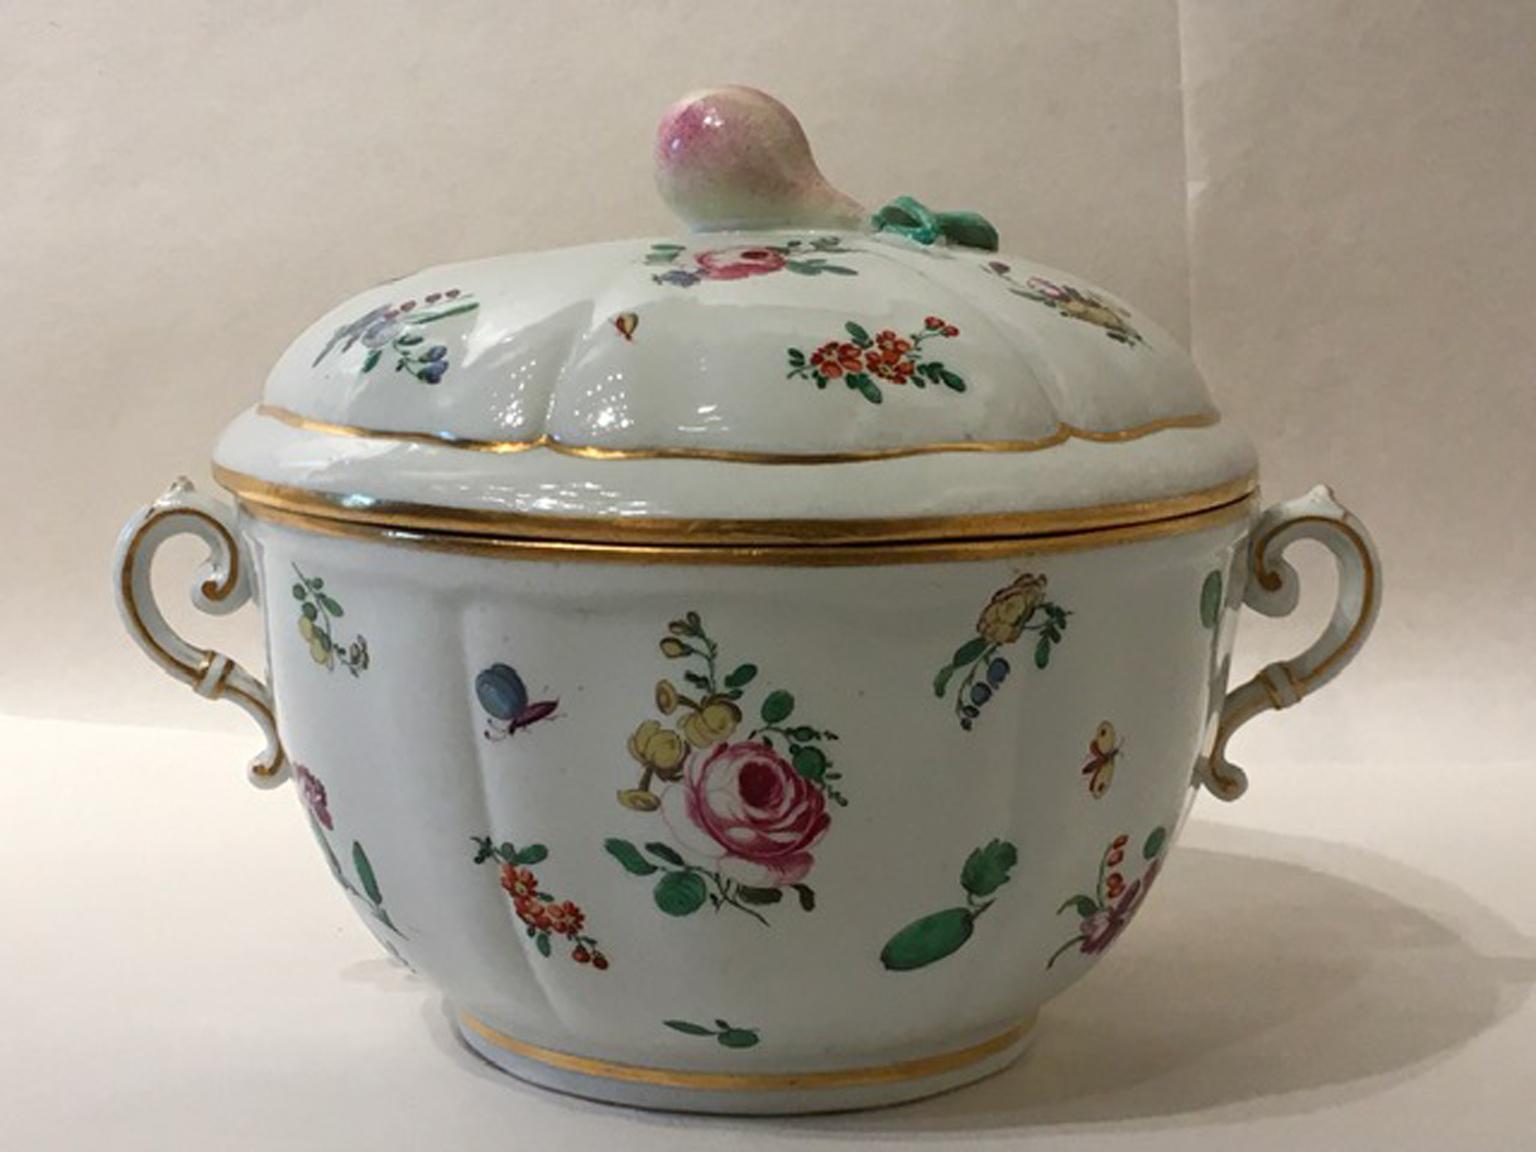 This beautiful covered cup was painted with grace and reproducing a variety of flowers, butterflies and natural elements very detailed. Golden profiles.
A joyful to look at it, a piece to collect
Two handles an the side. In very good conditions. 
No